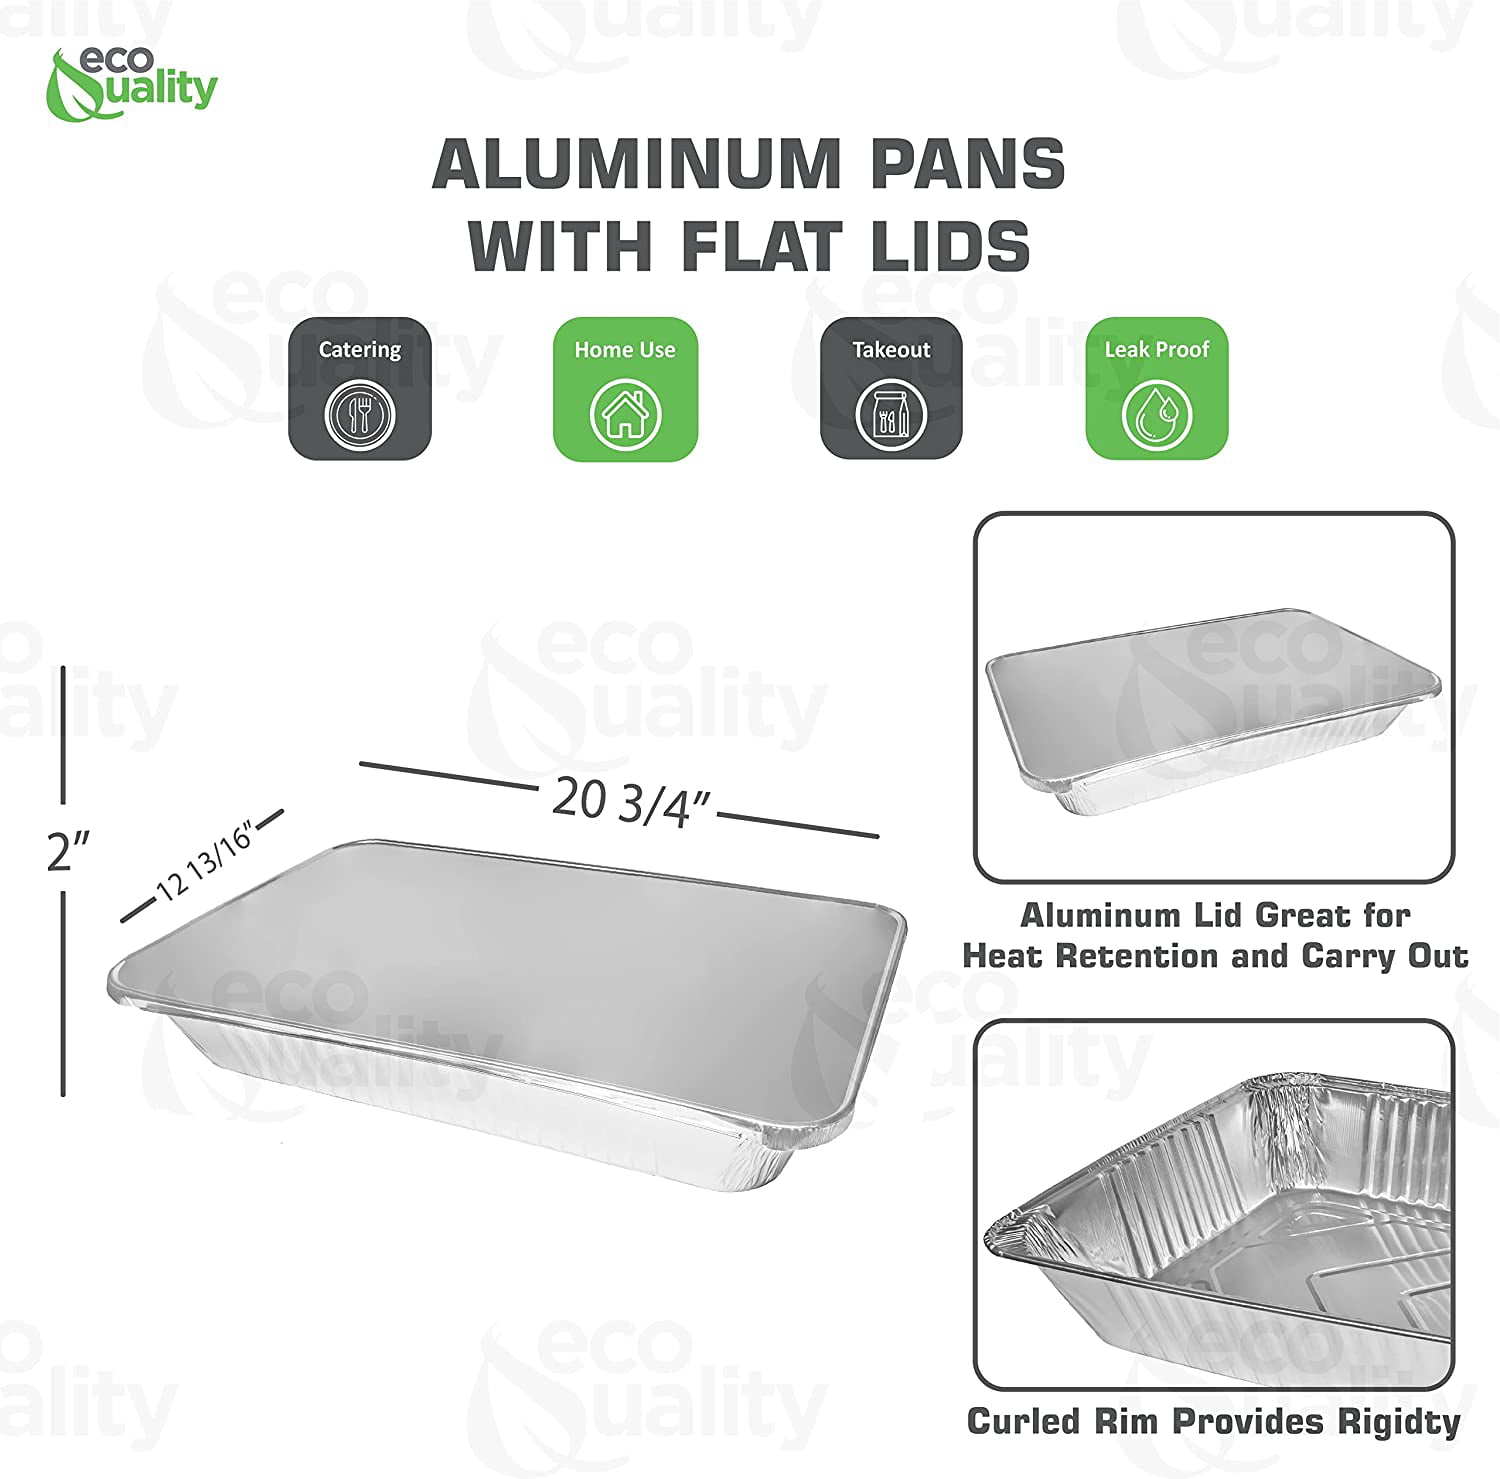 EHOMEA2Z Large Aluminum Pans (15 Pack) Full Size Deep Foil Disposable  Durable Large Steam Table Pans for Baking Serving, Chafing Trays for  Caterers